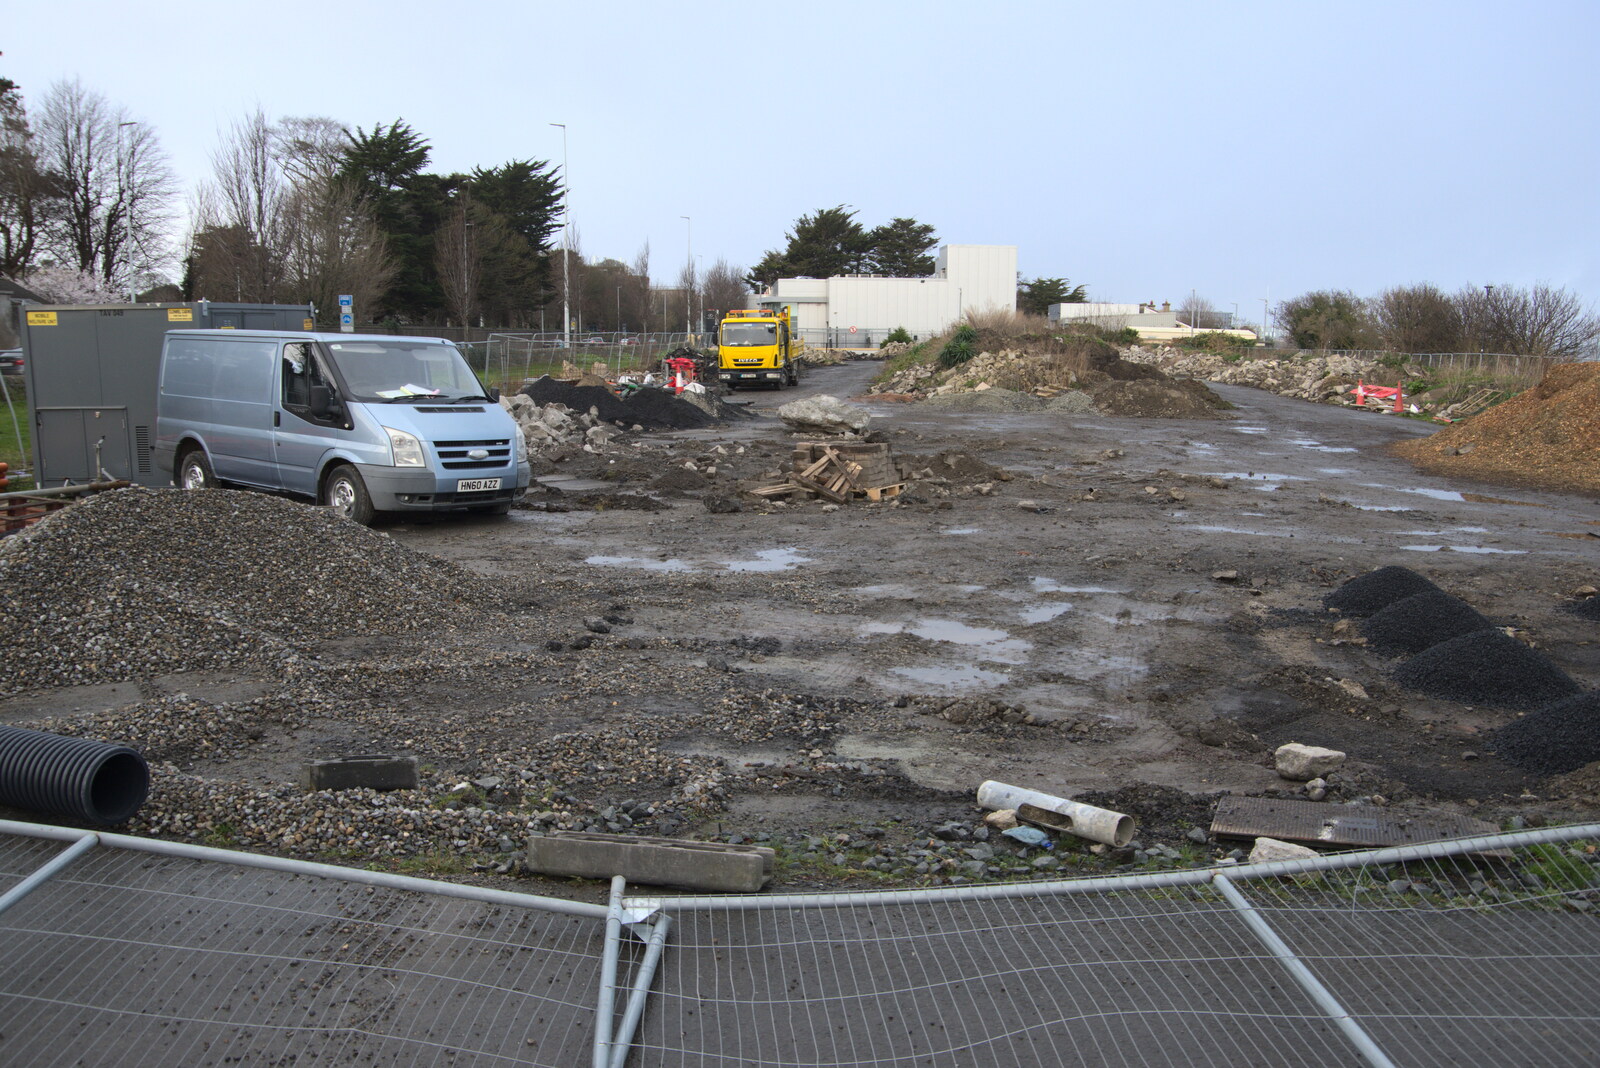 The End of the Breffni, Blackrock, Dublin - 18th February 2023: Booterstown's getting some sort of skate park